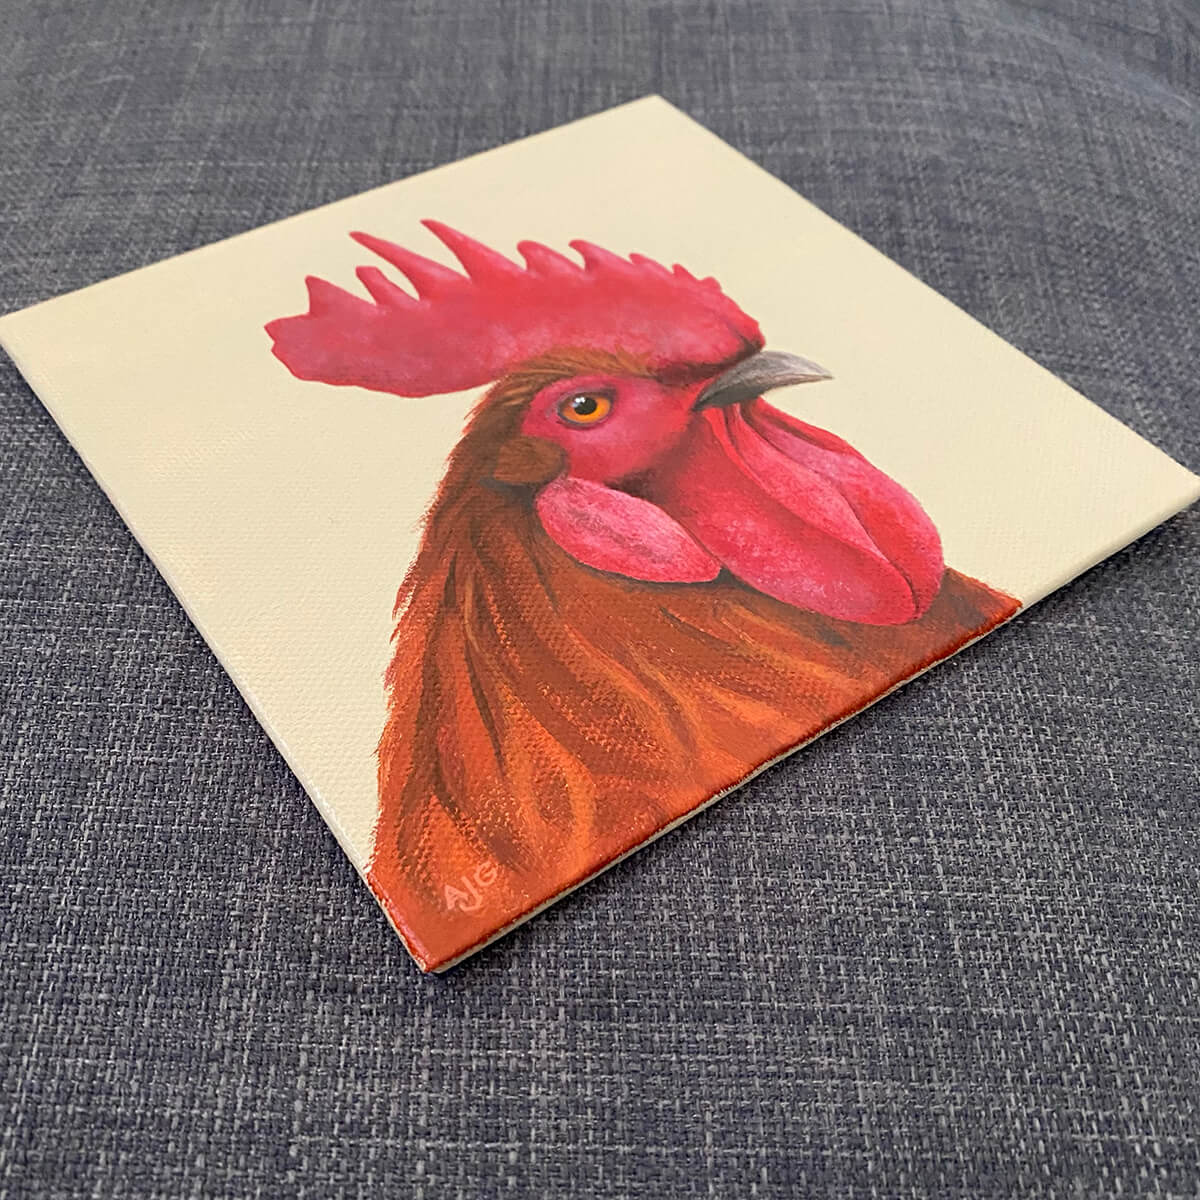 Original small acrylic painting of a male chicken by Amanda Gosse